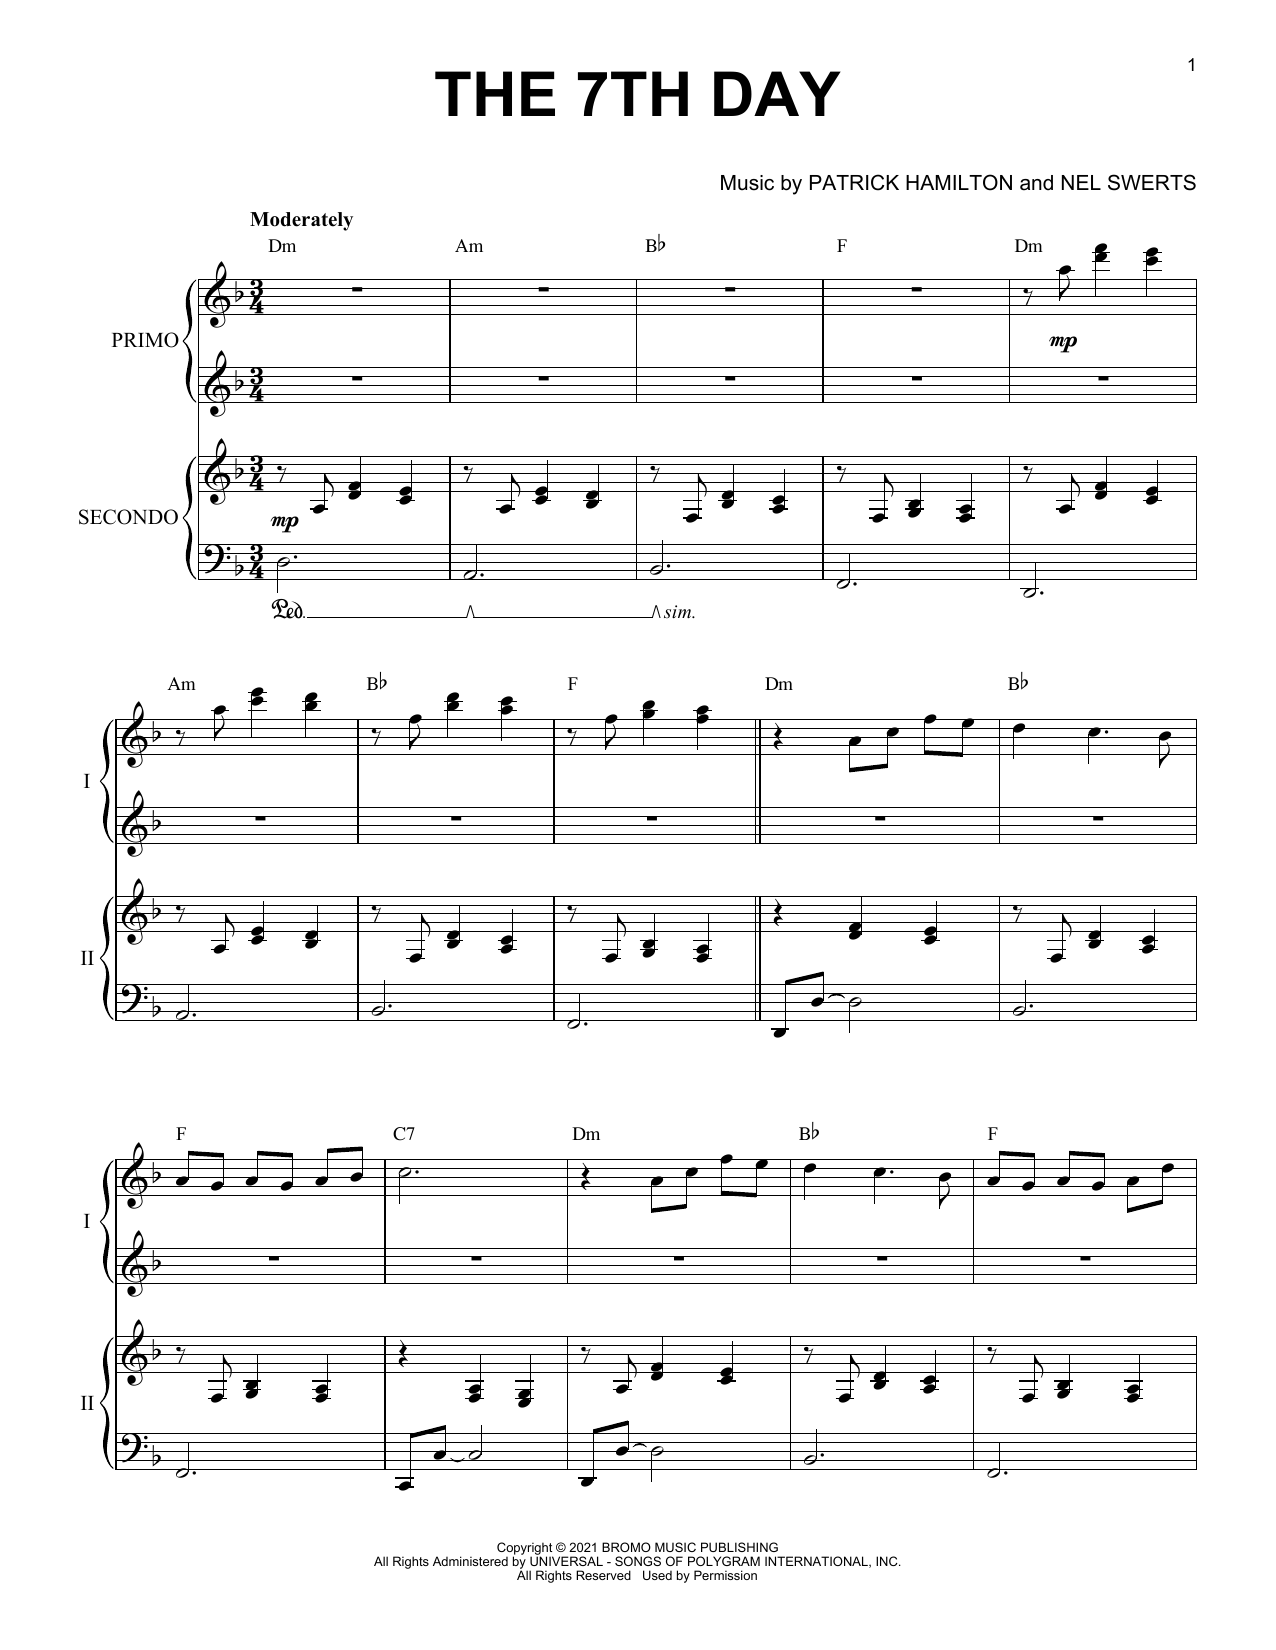 Download Patrick Hamilton & Nel Swerts The 7th Day Sheet Music